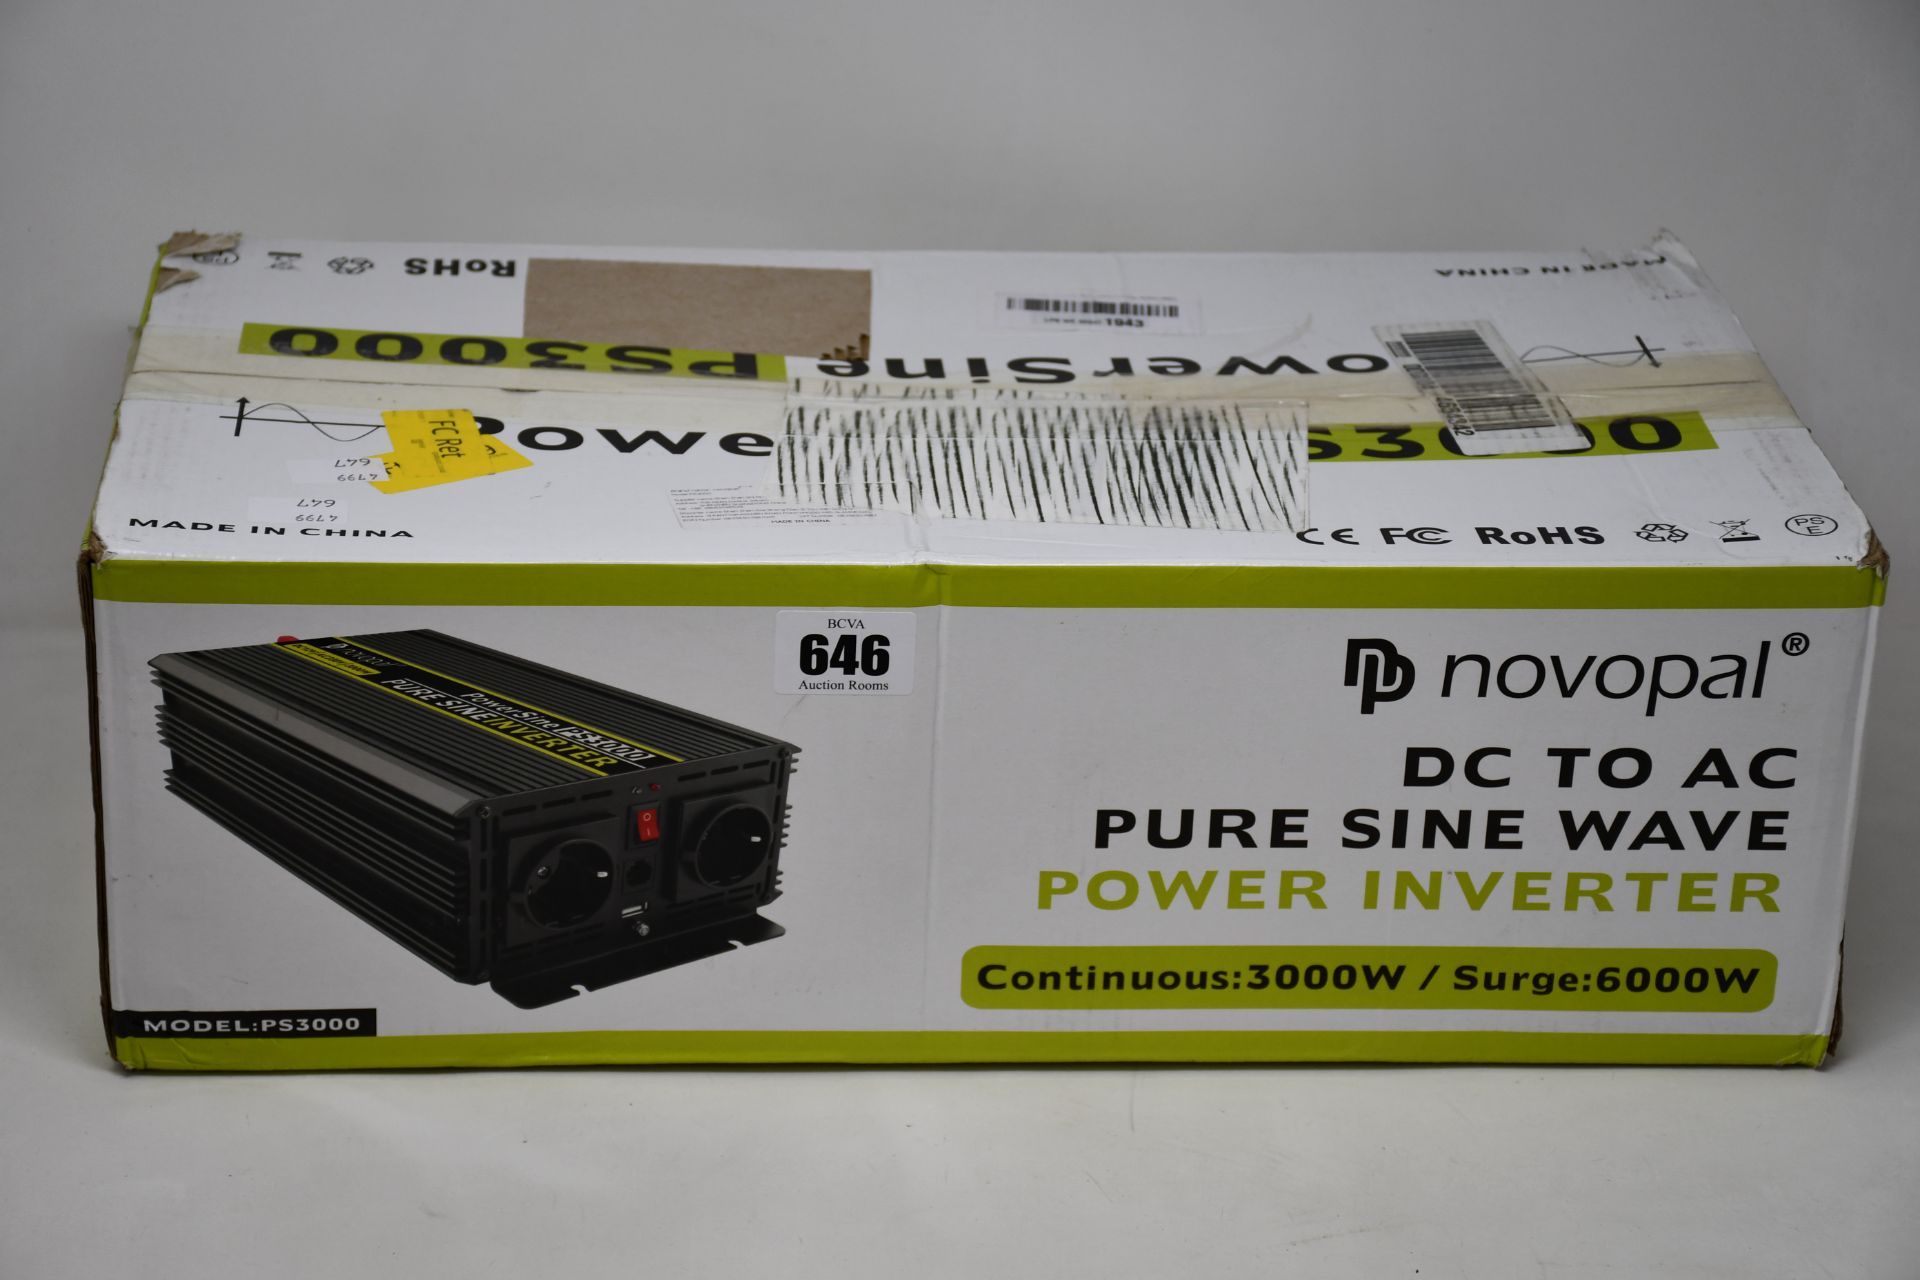 A boxed as new Novopal DC to AC Pure Sine Wave Power Inverter (PS3000).